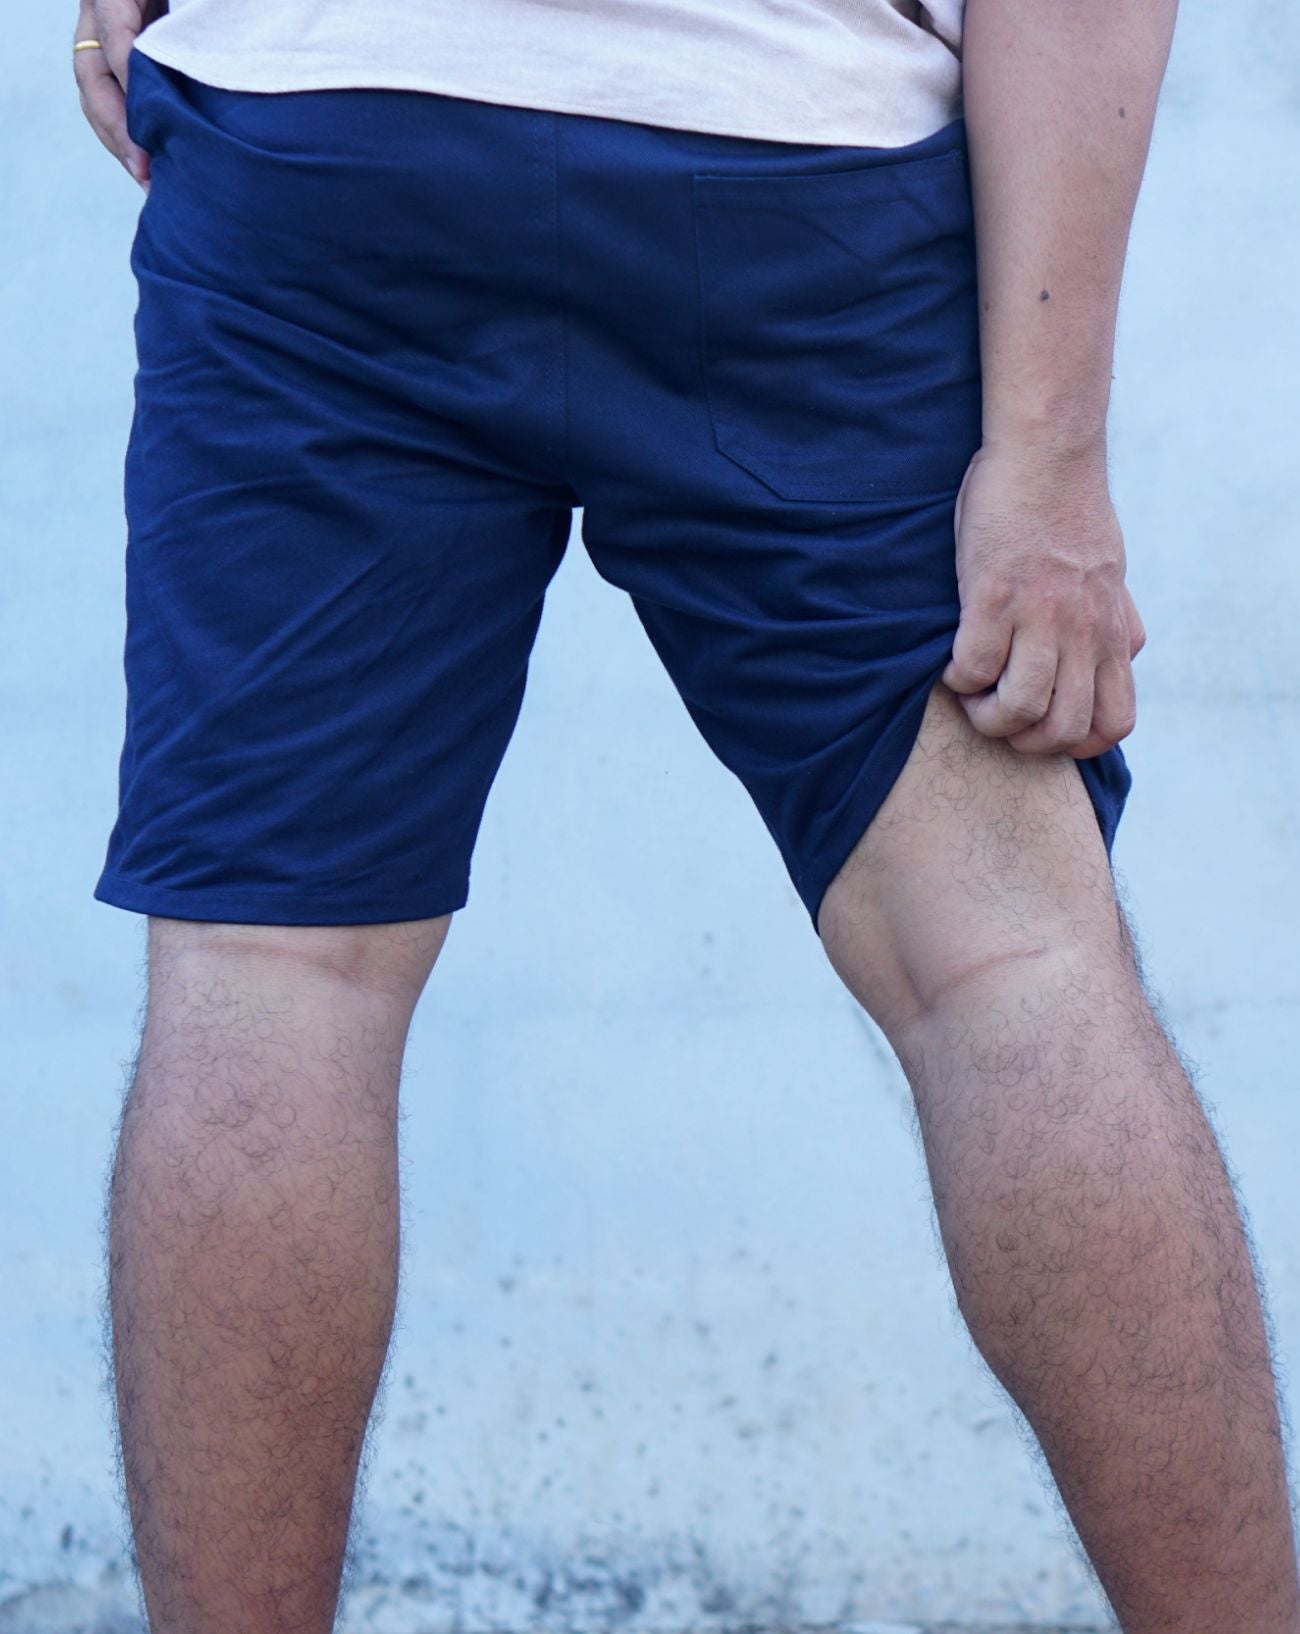 How To Prevent Thigh & Groin Chafing When Running?